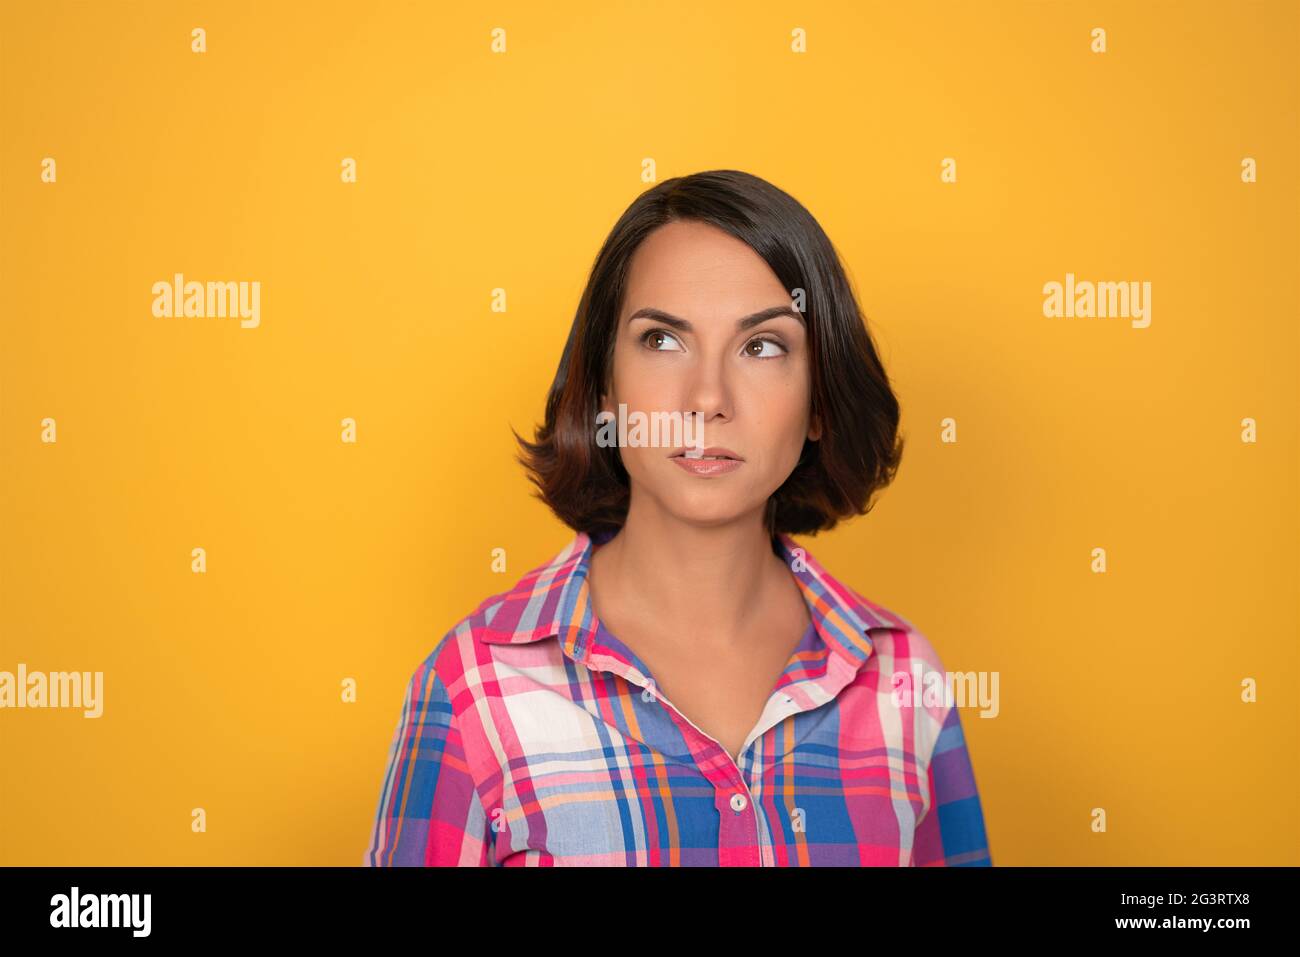 Thinking young woman makes serious decision. Pretty brunette looks up at copy space on left. Isolated on yellow background Stock Photo